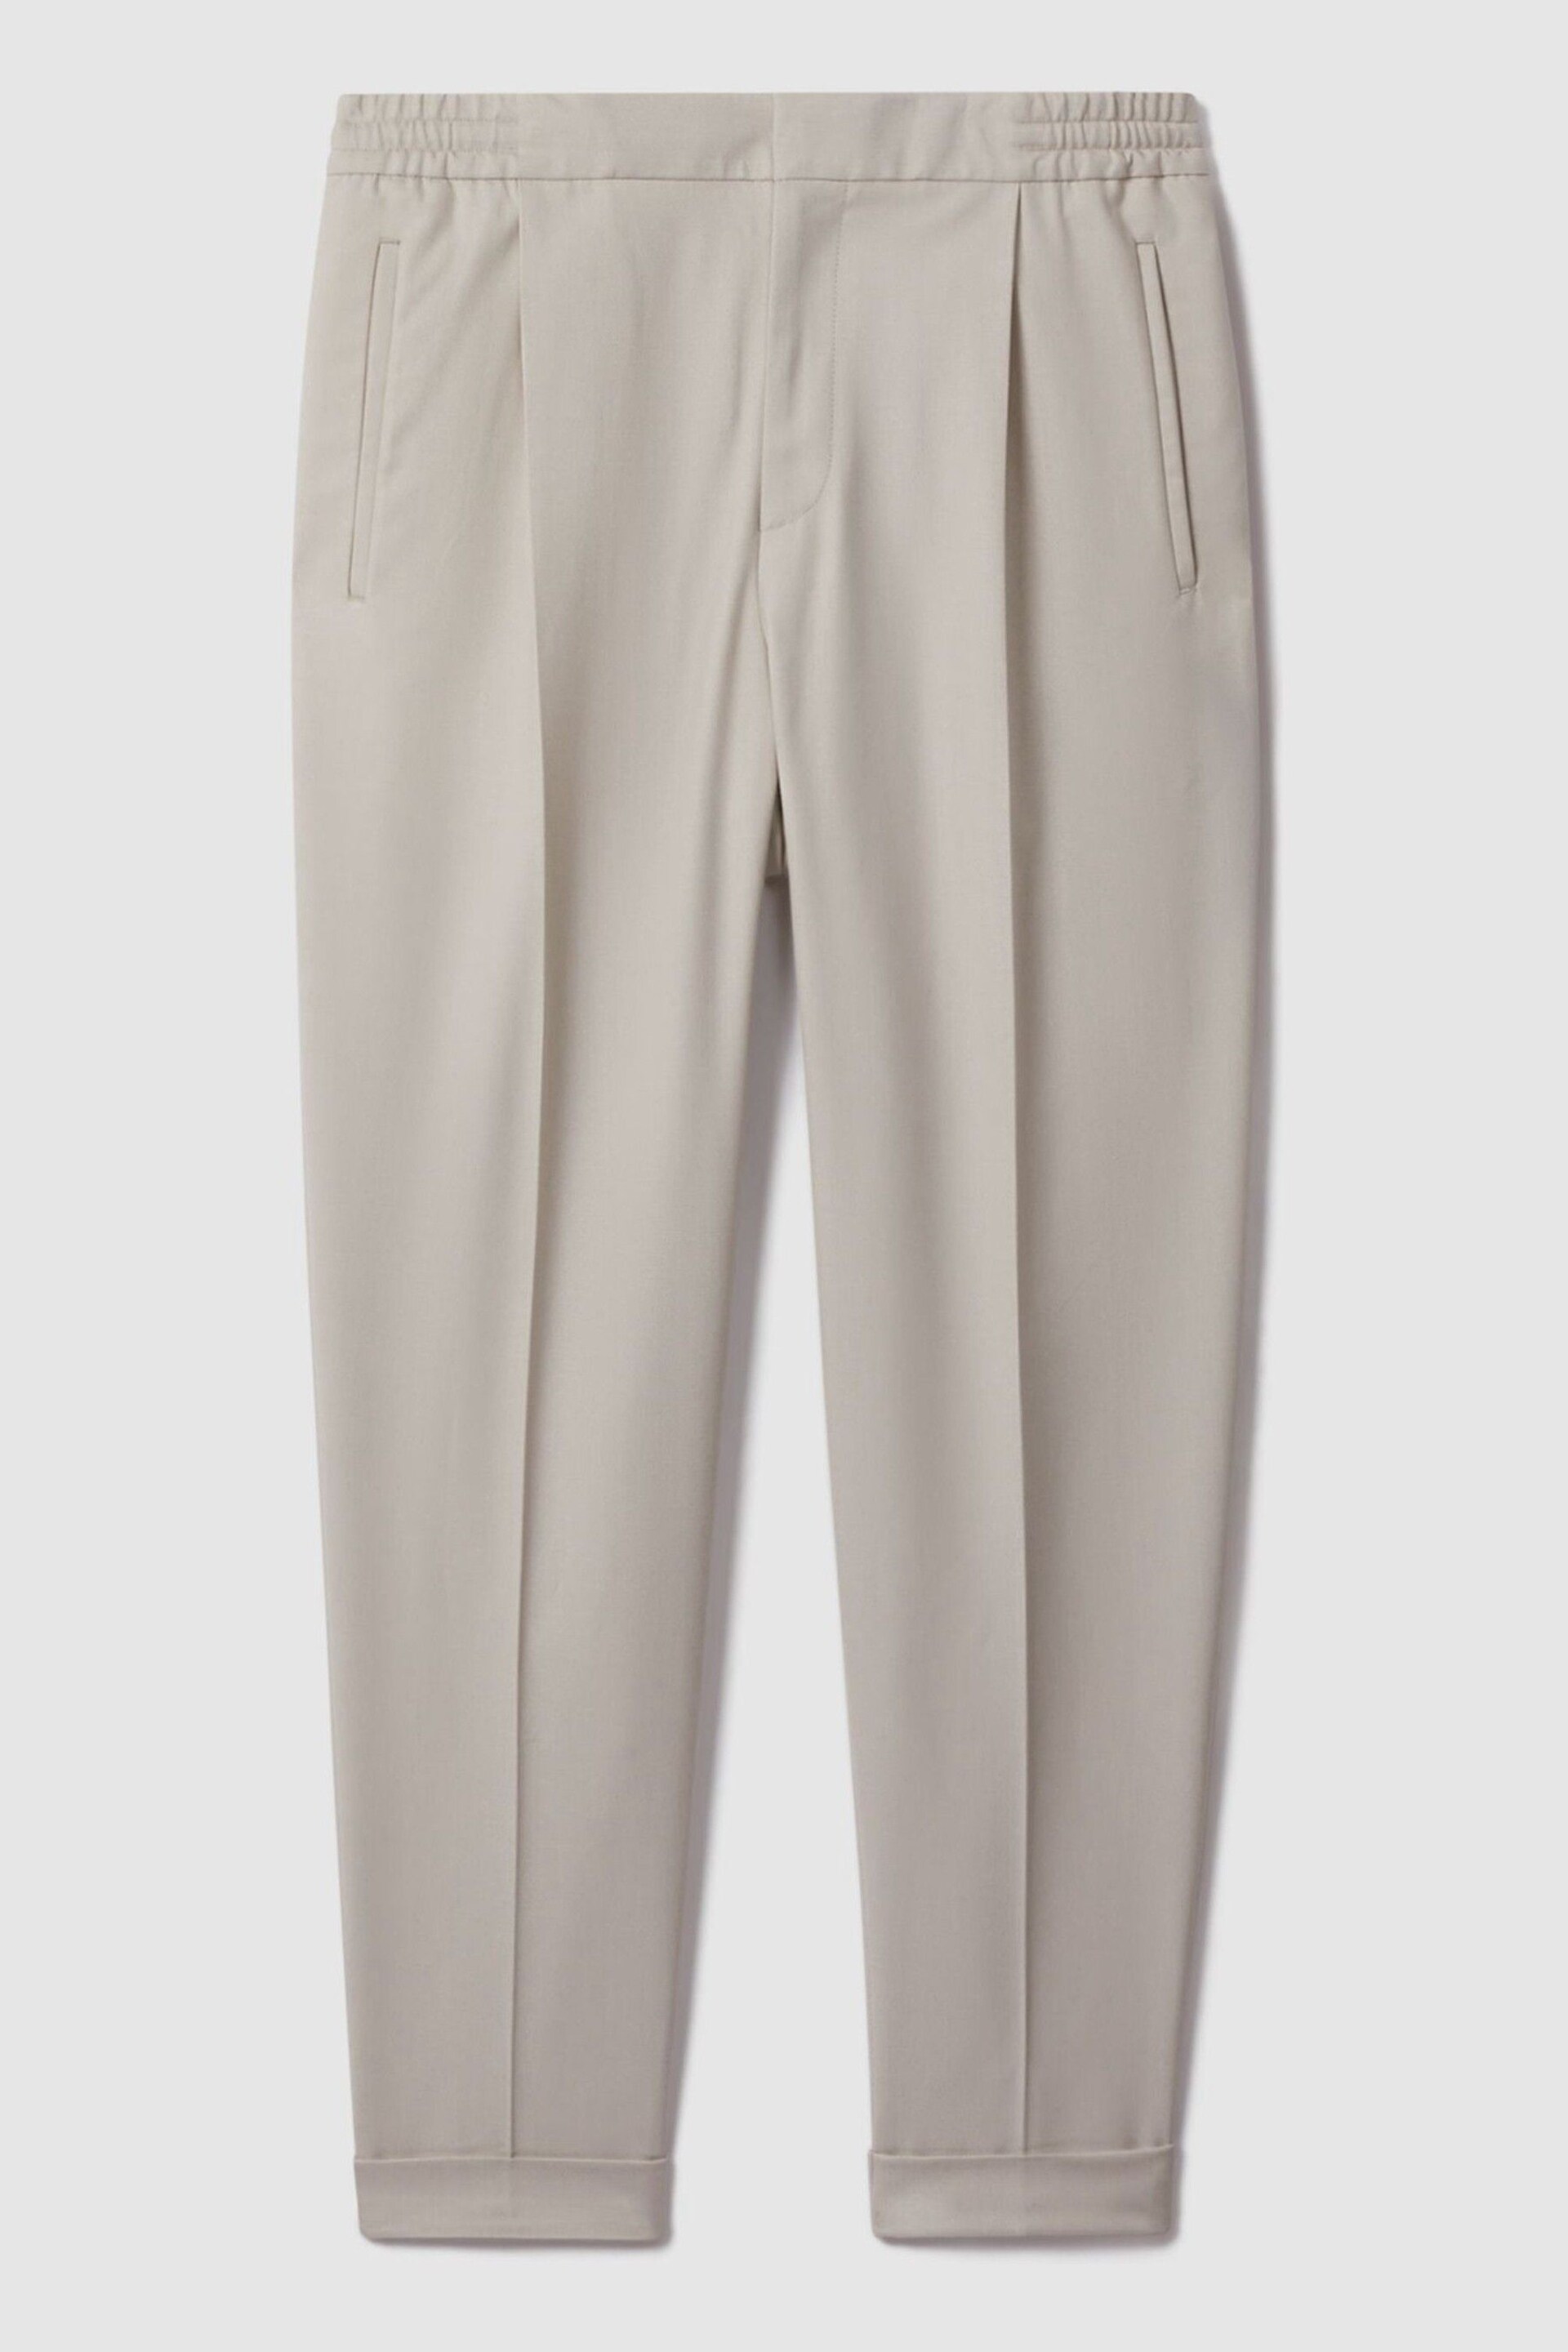 Reiss Stone Brighton Relaxed Drawstring Trousers with Turn-Ups - Image 2 of 5